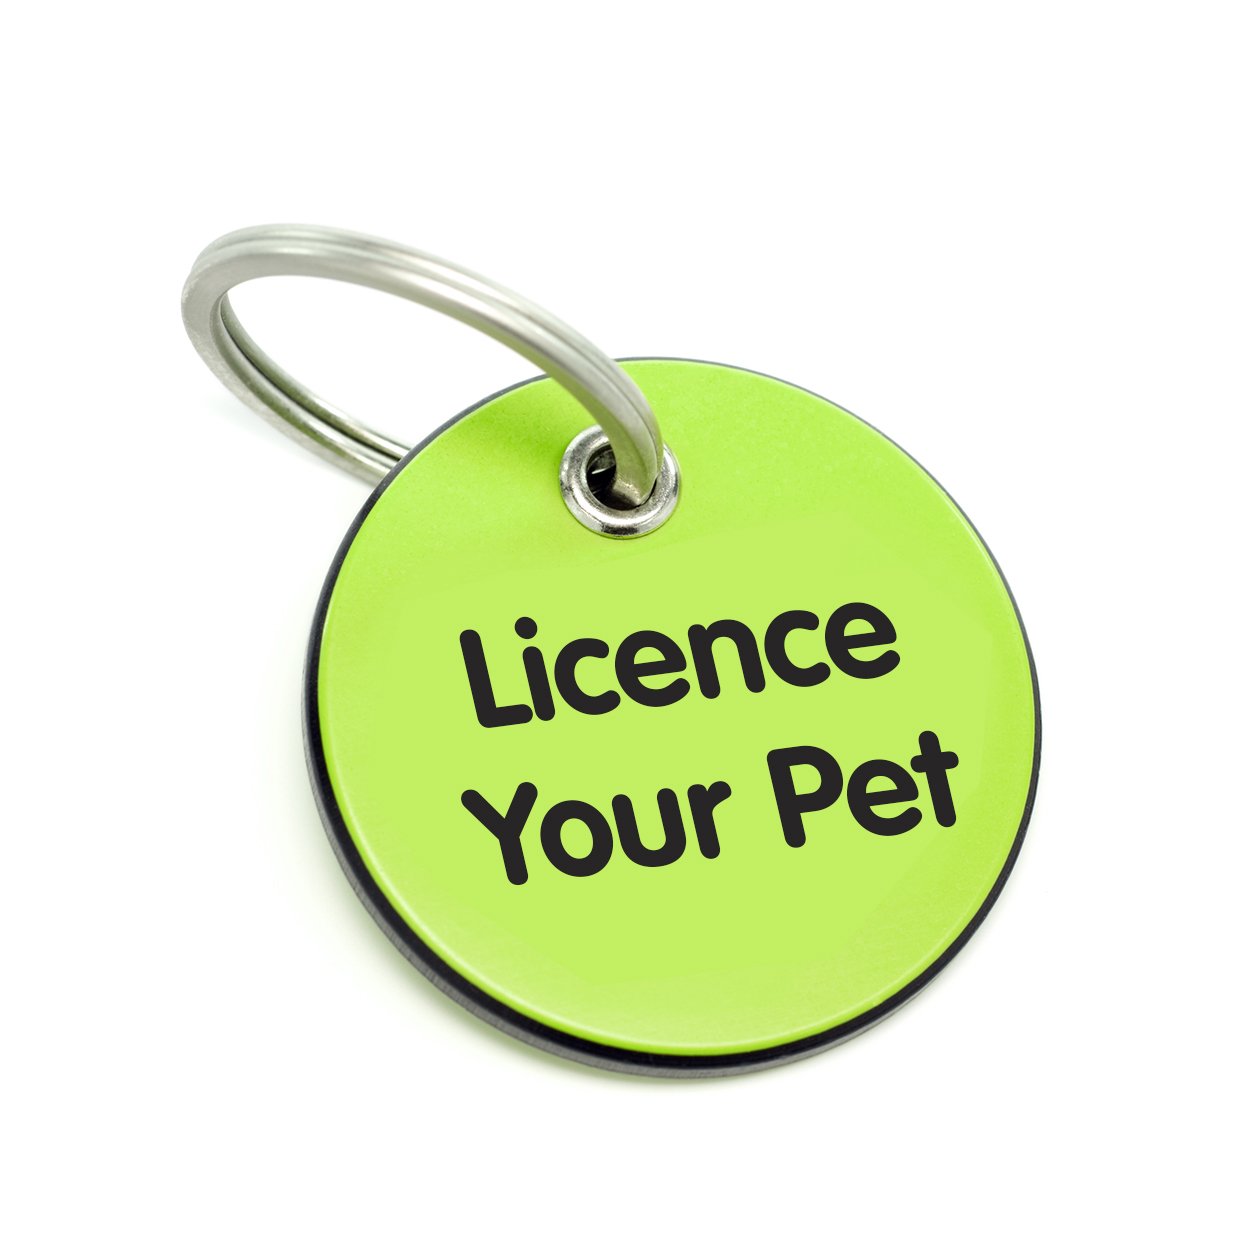 Pet Licence tag that says Licence your Pet on a white background